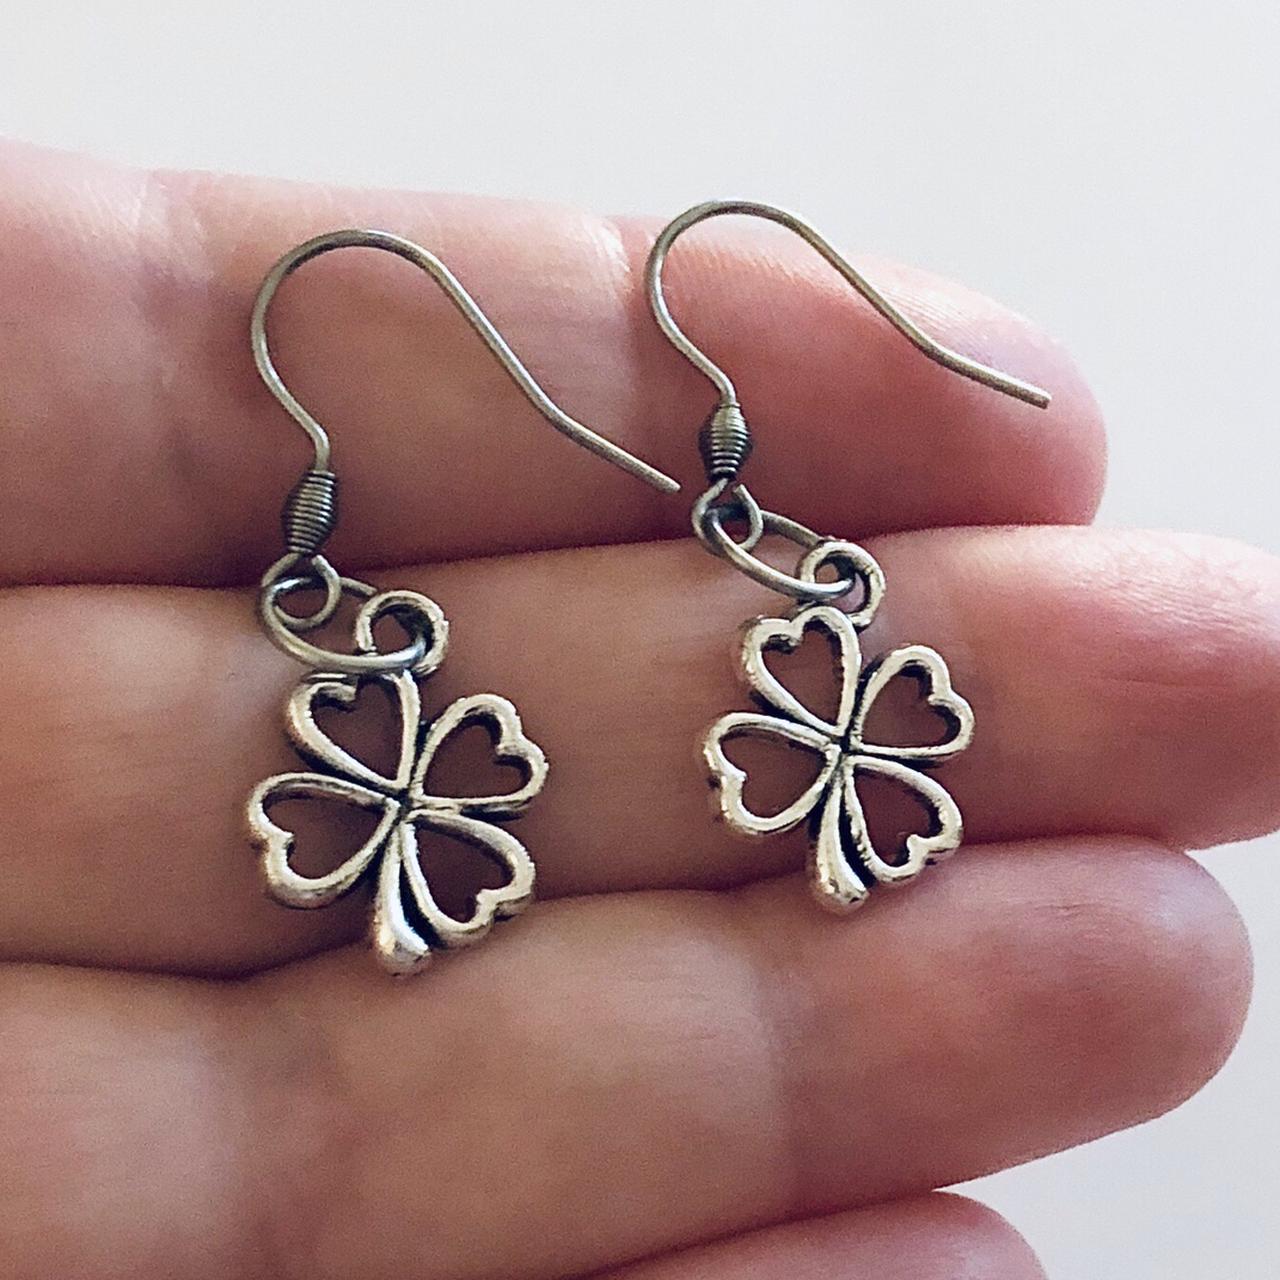 Product Image 3 - Four leaf clover earrings, flower